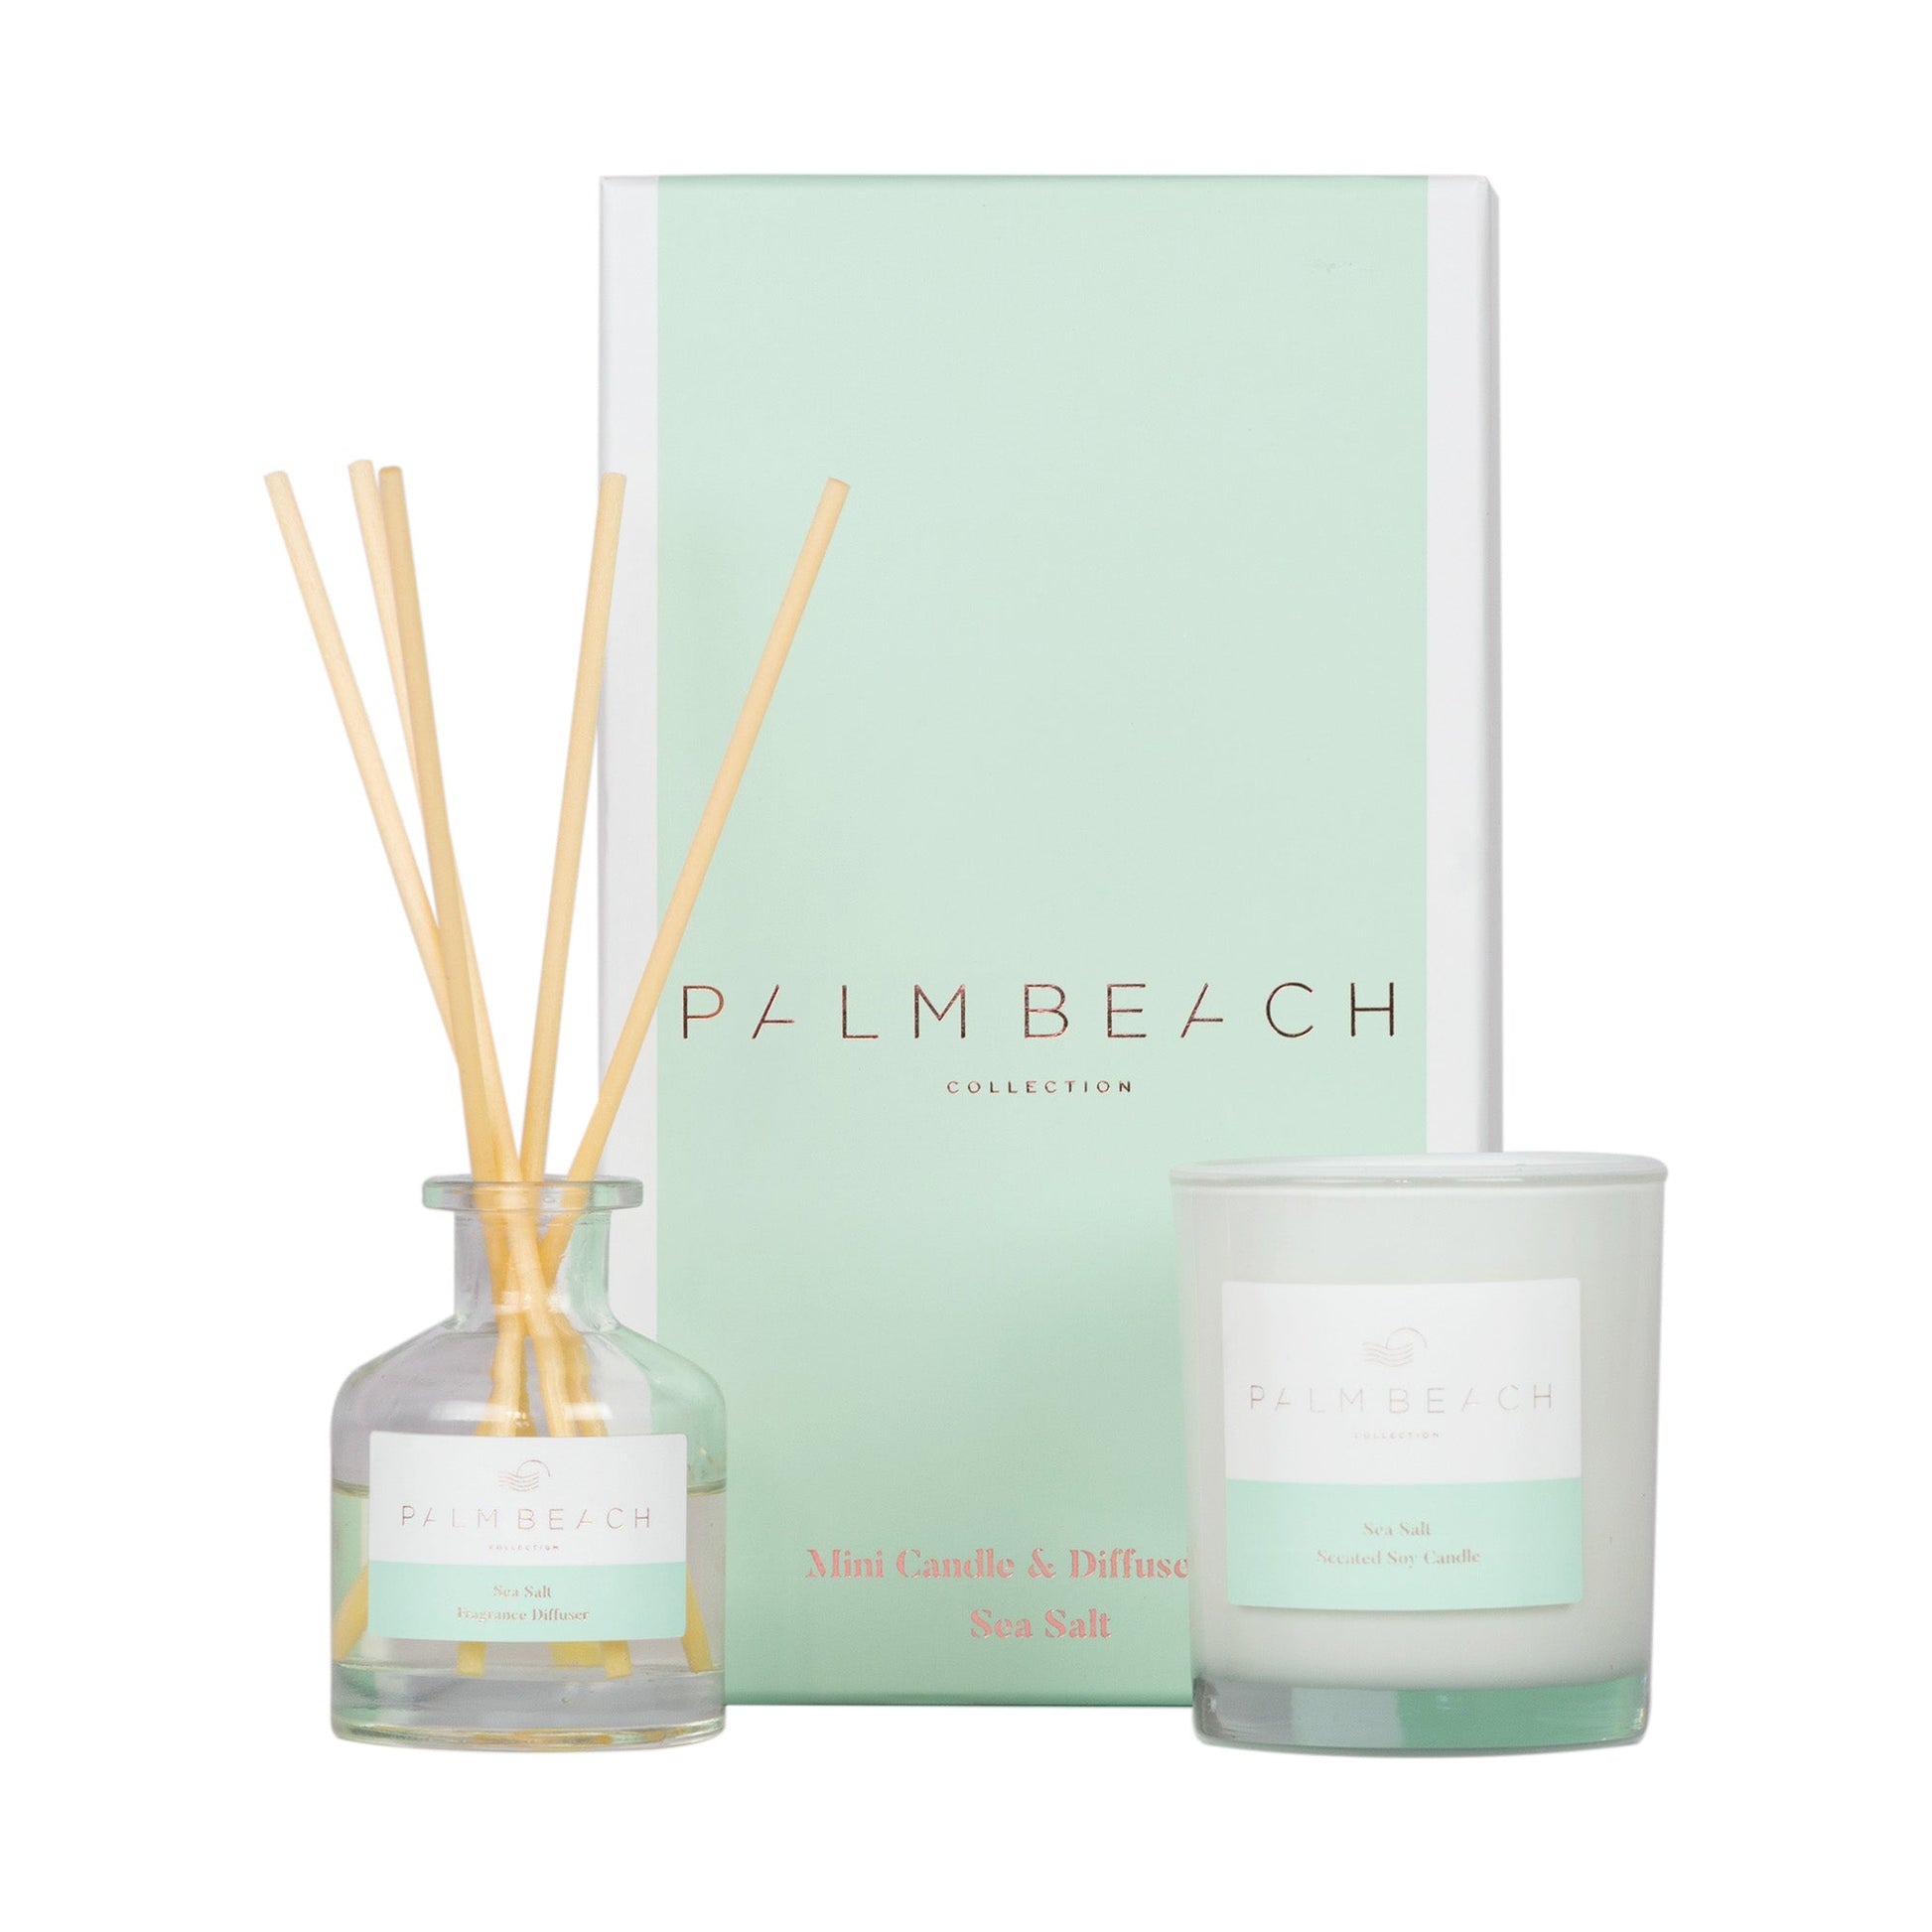 Palm Beach pale green/blue coloured box with a mini candle and diffuser. 